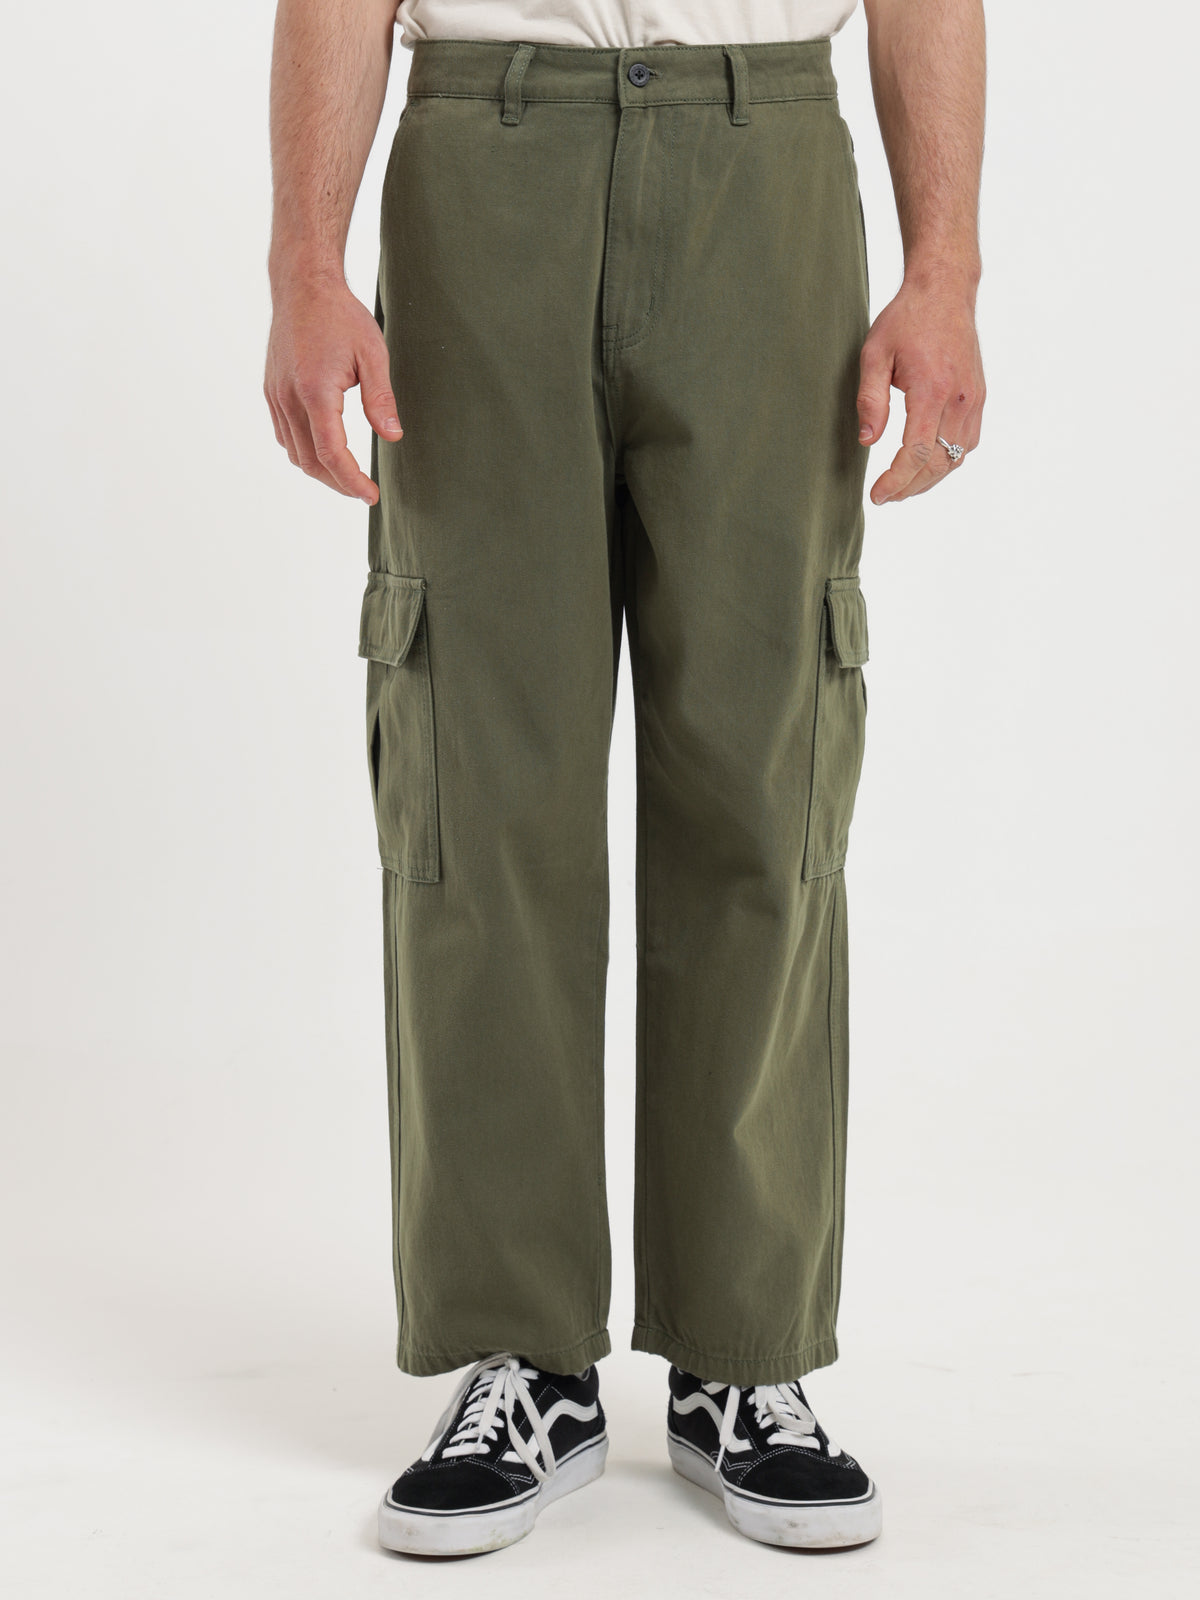 91 Cargo Pants in Military